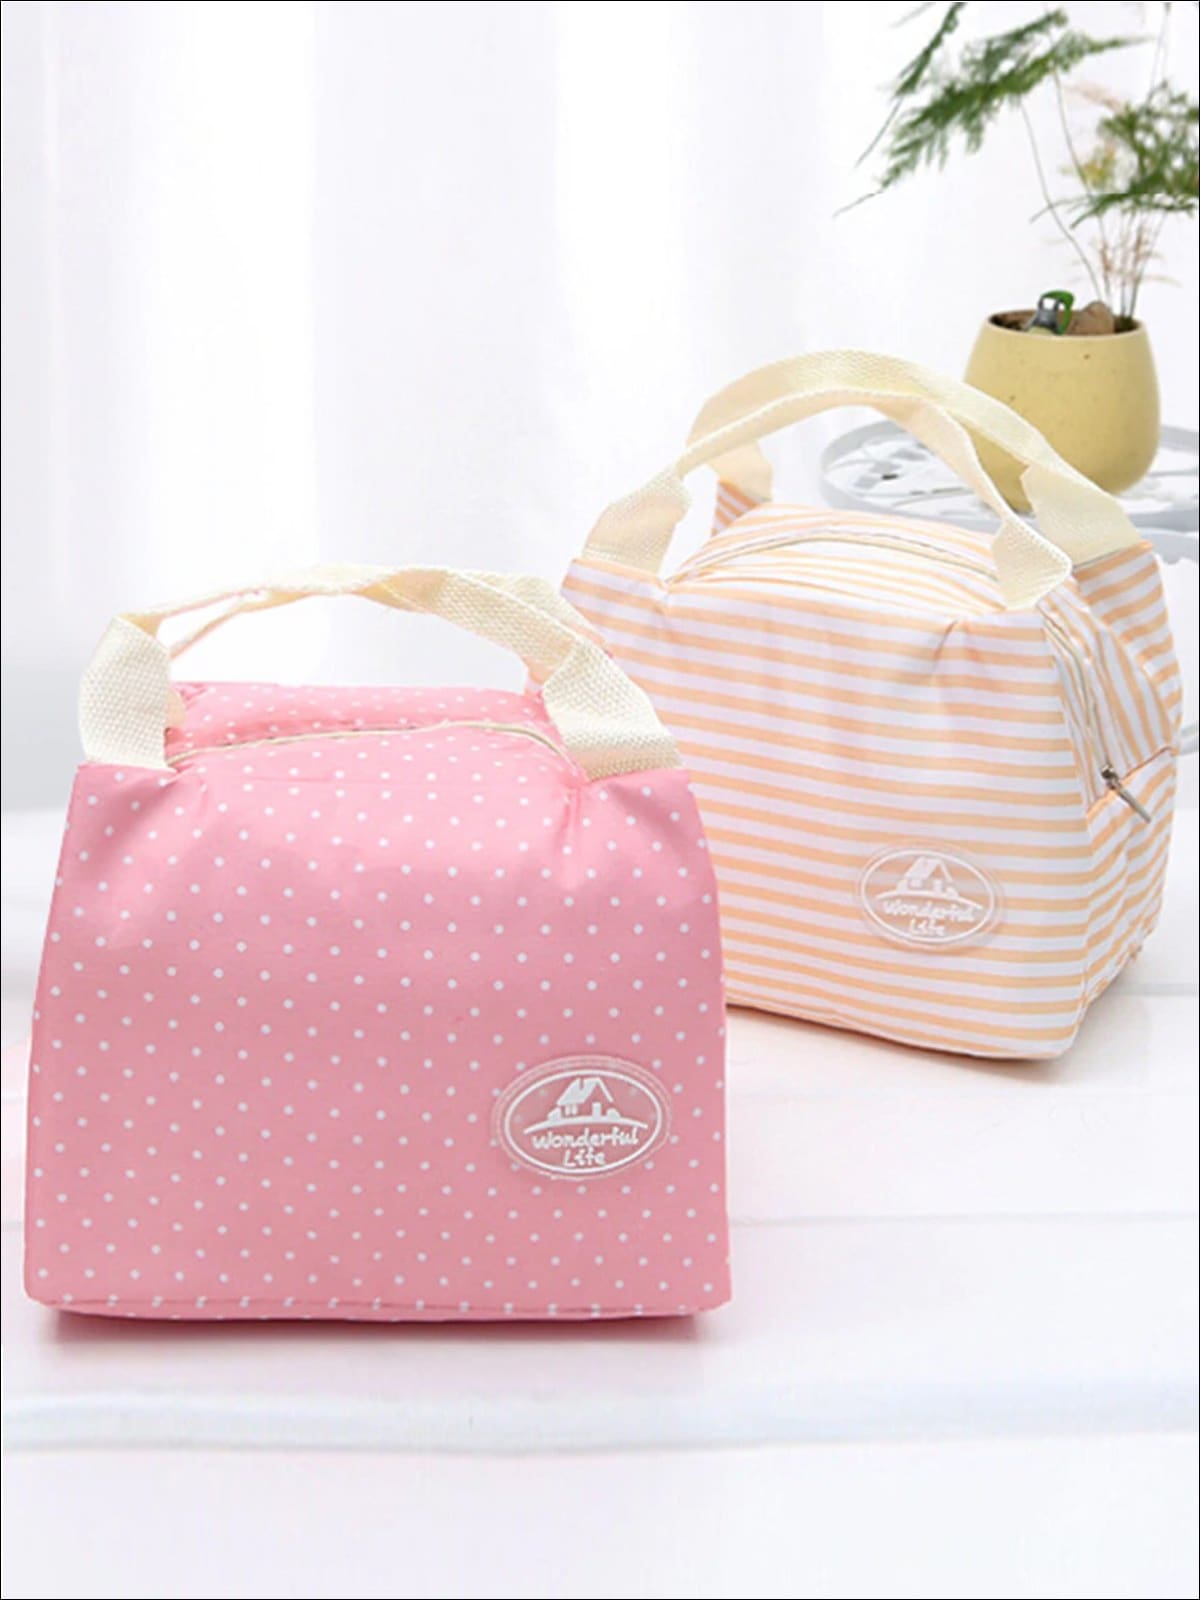 Lunch Boxes Women, Lunch Boxes Bag, Elle Lunch Box